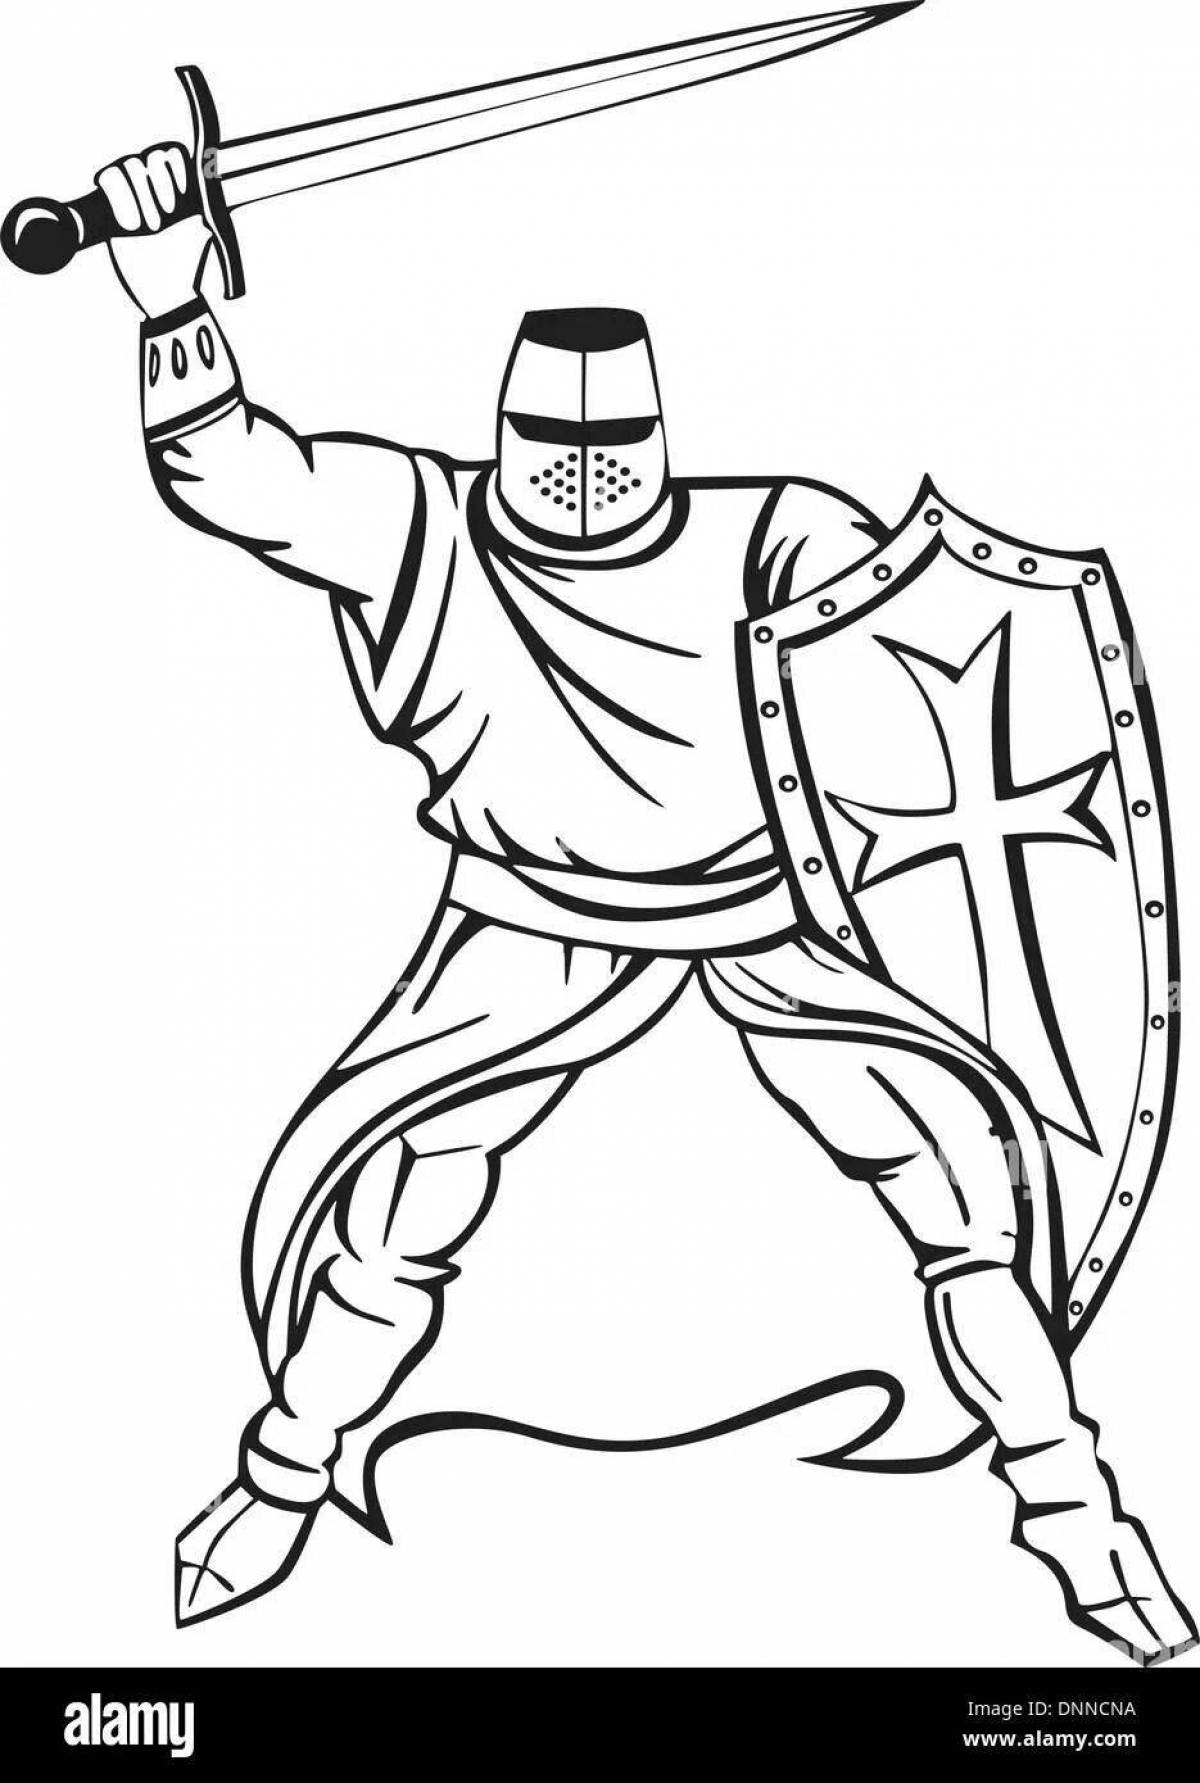 Gallant Crusaders coloring pages